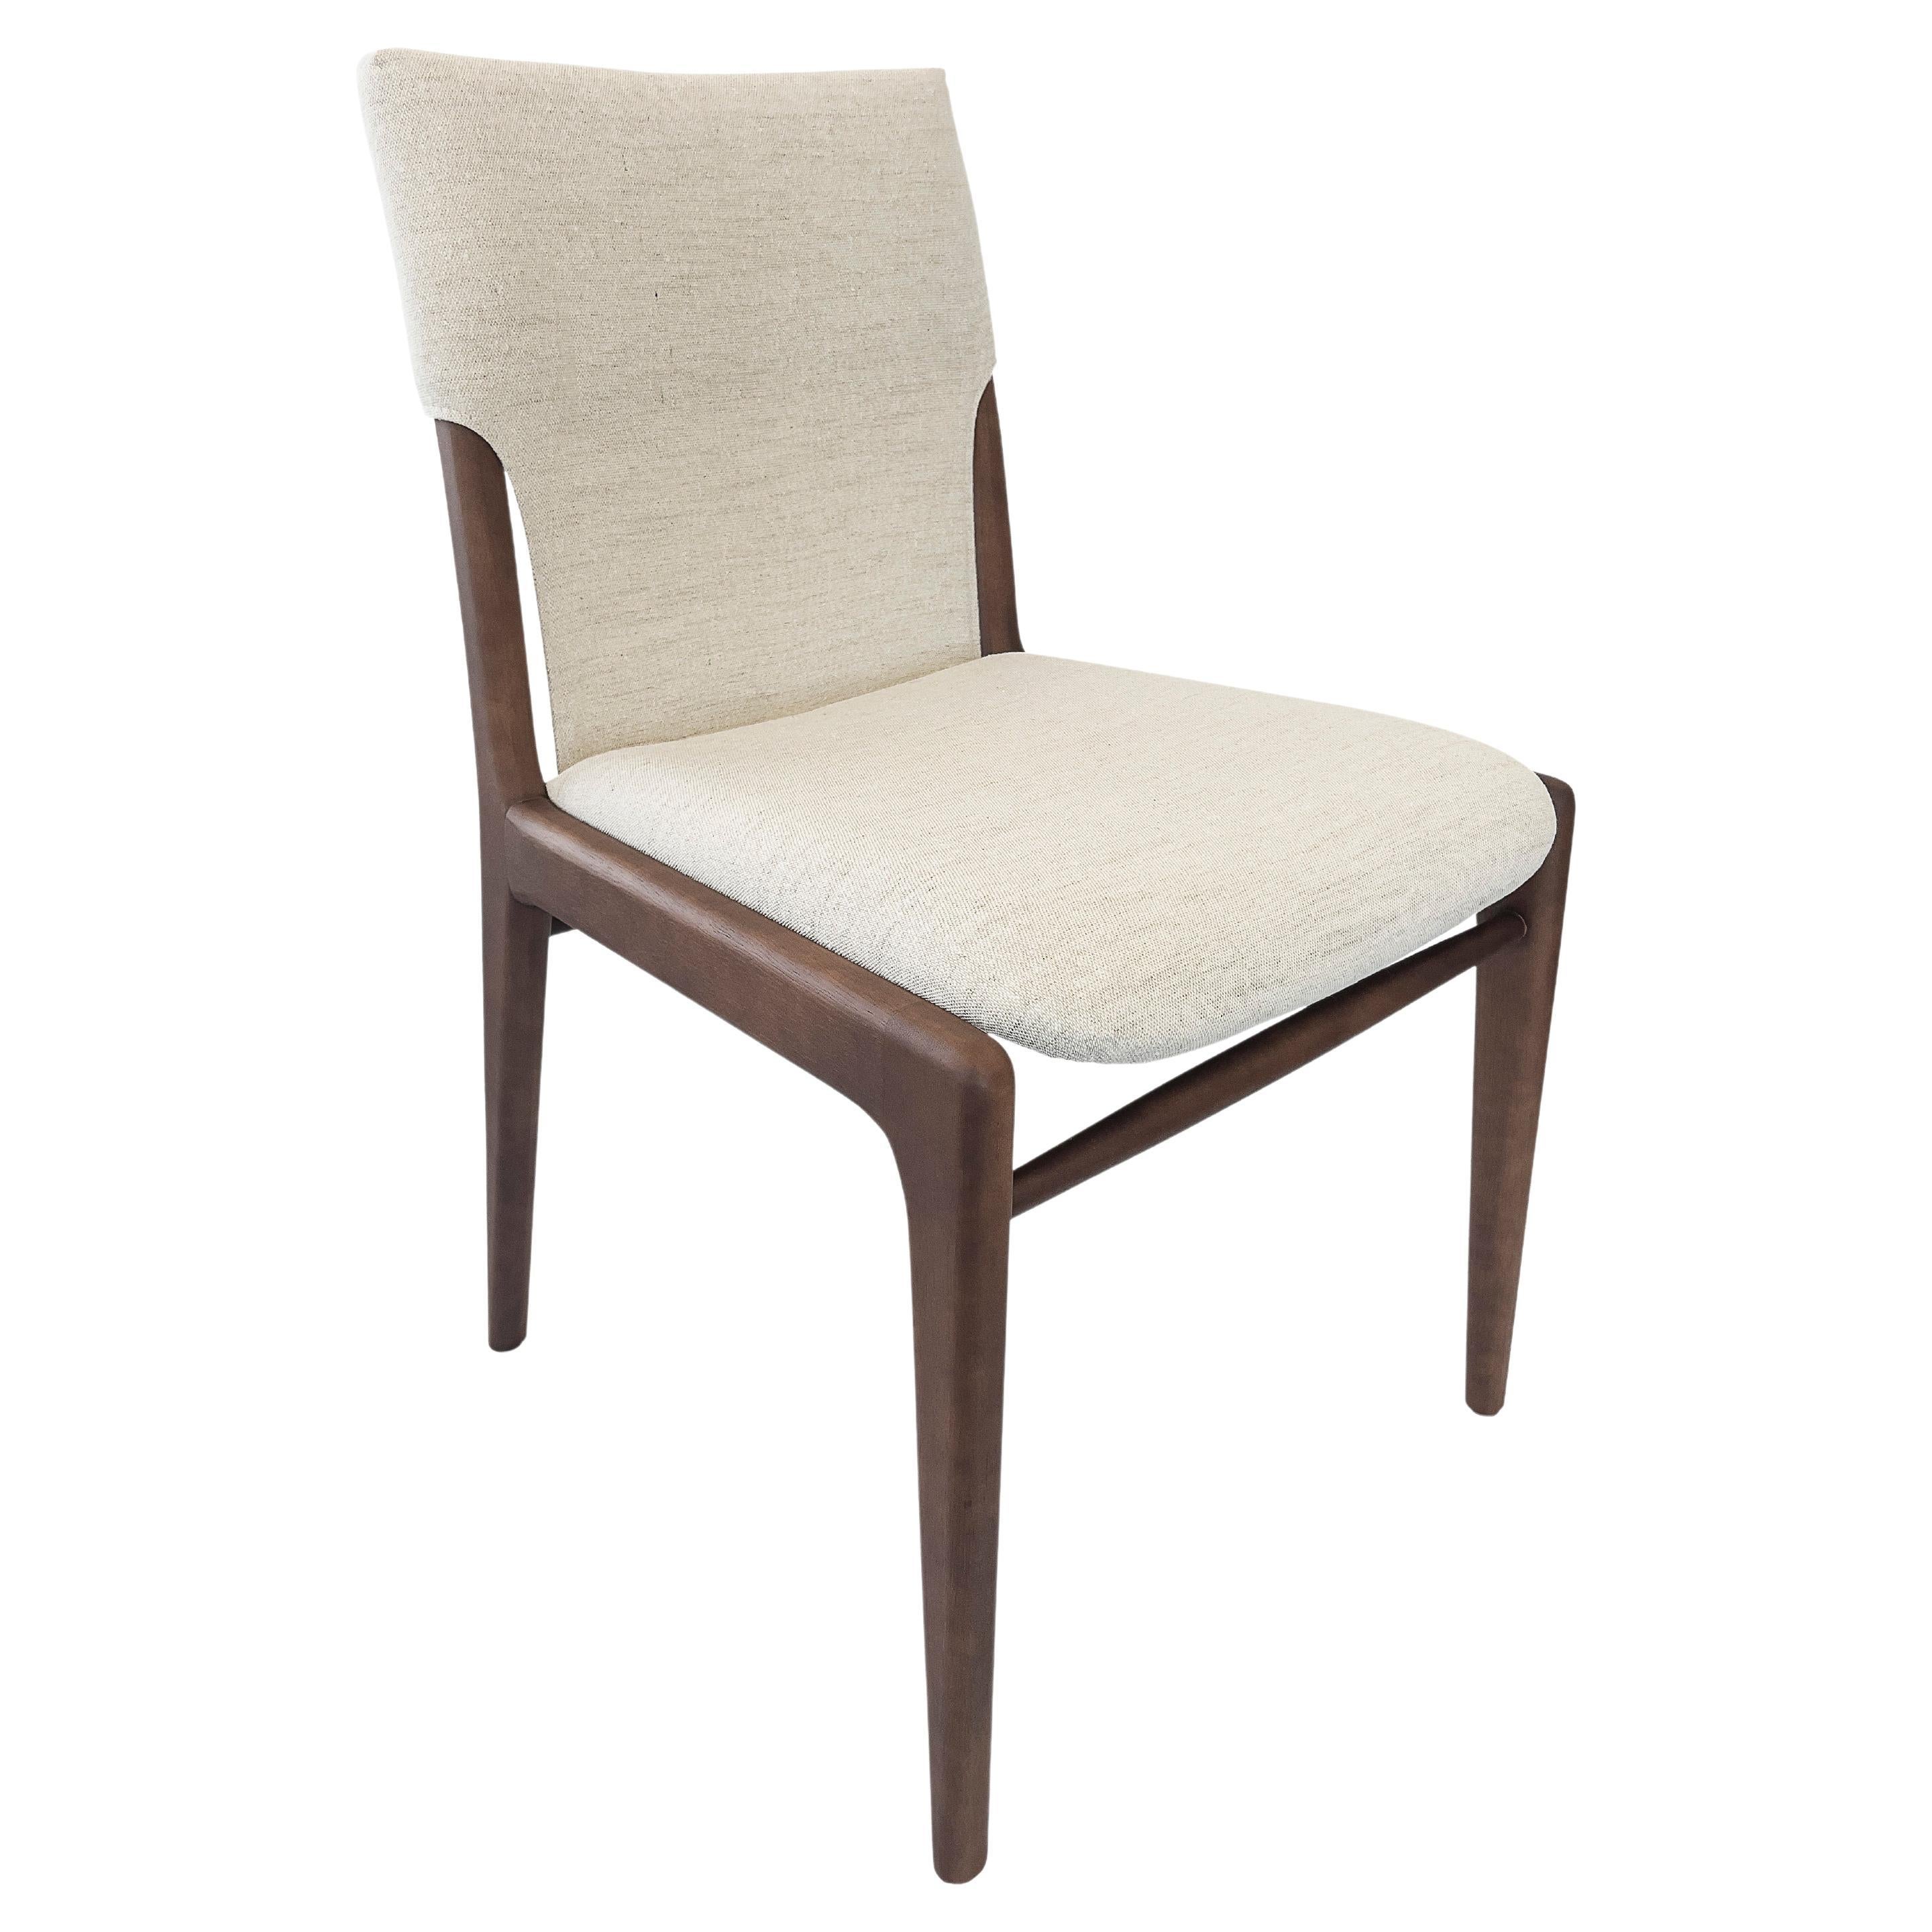 Legendary Uultis designer Mr. Sergio Batista has created the Tress dining chair in a light beige fabric upholstered and a walnut wood finish. His creations are synonymous with style, elegance, comfort, and quality. With the Tress chair, Mr. Batista